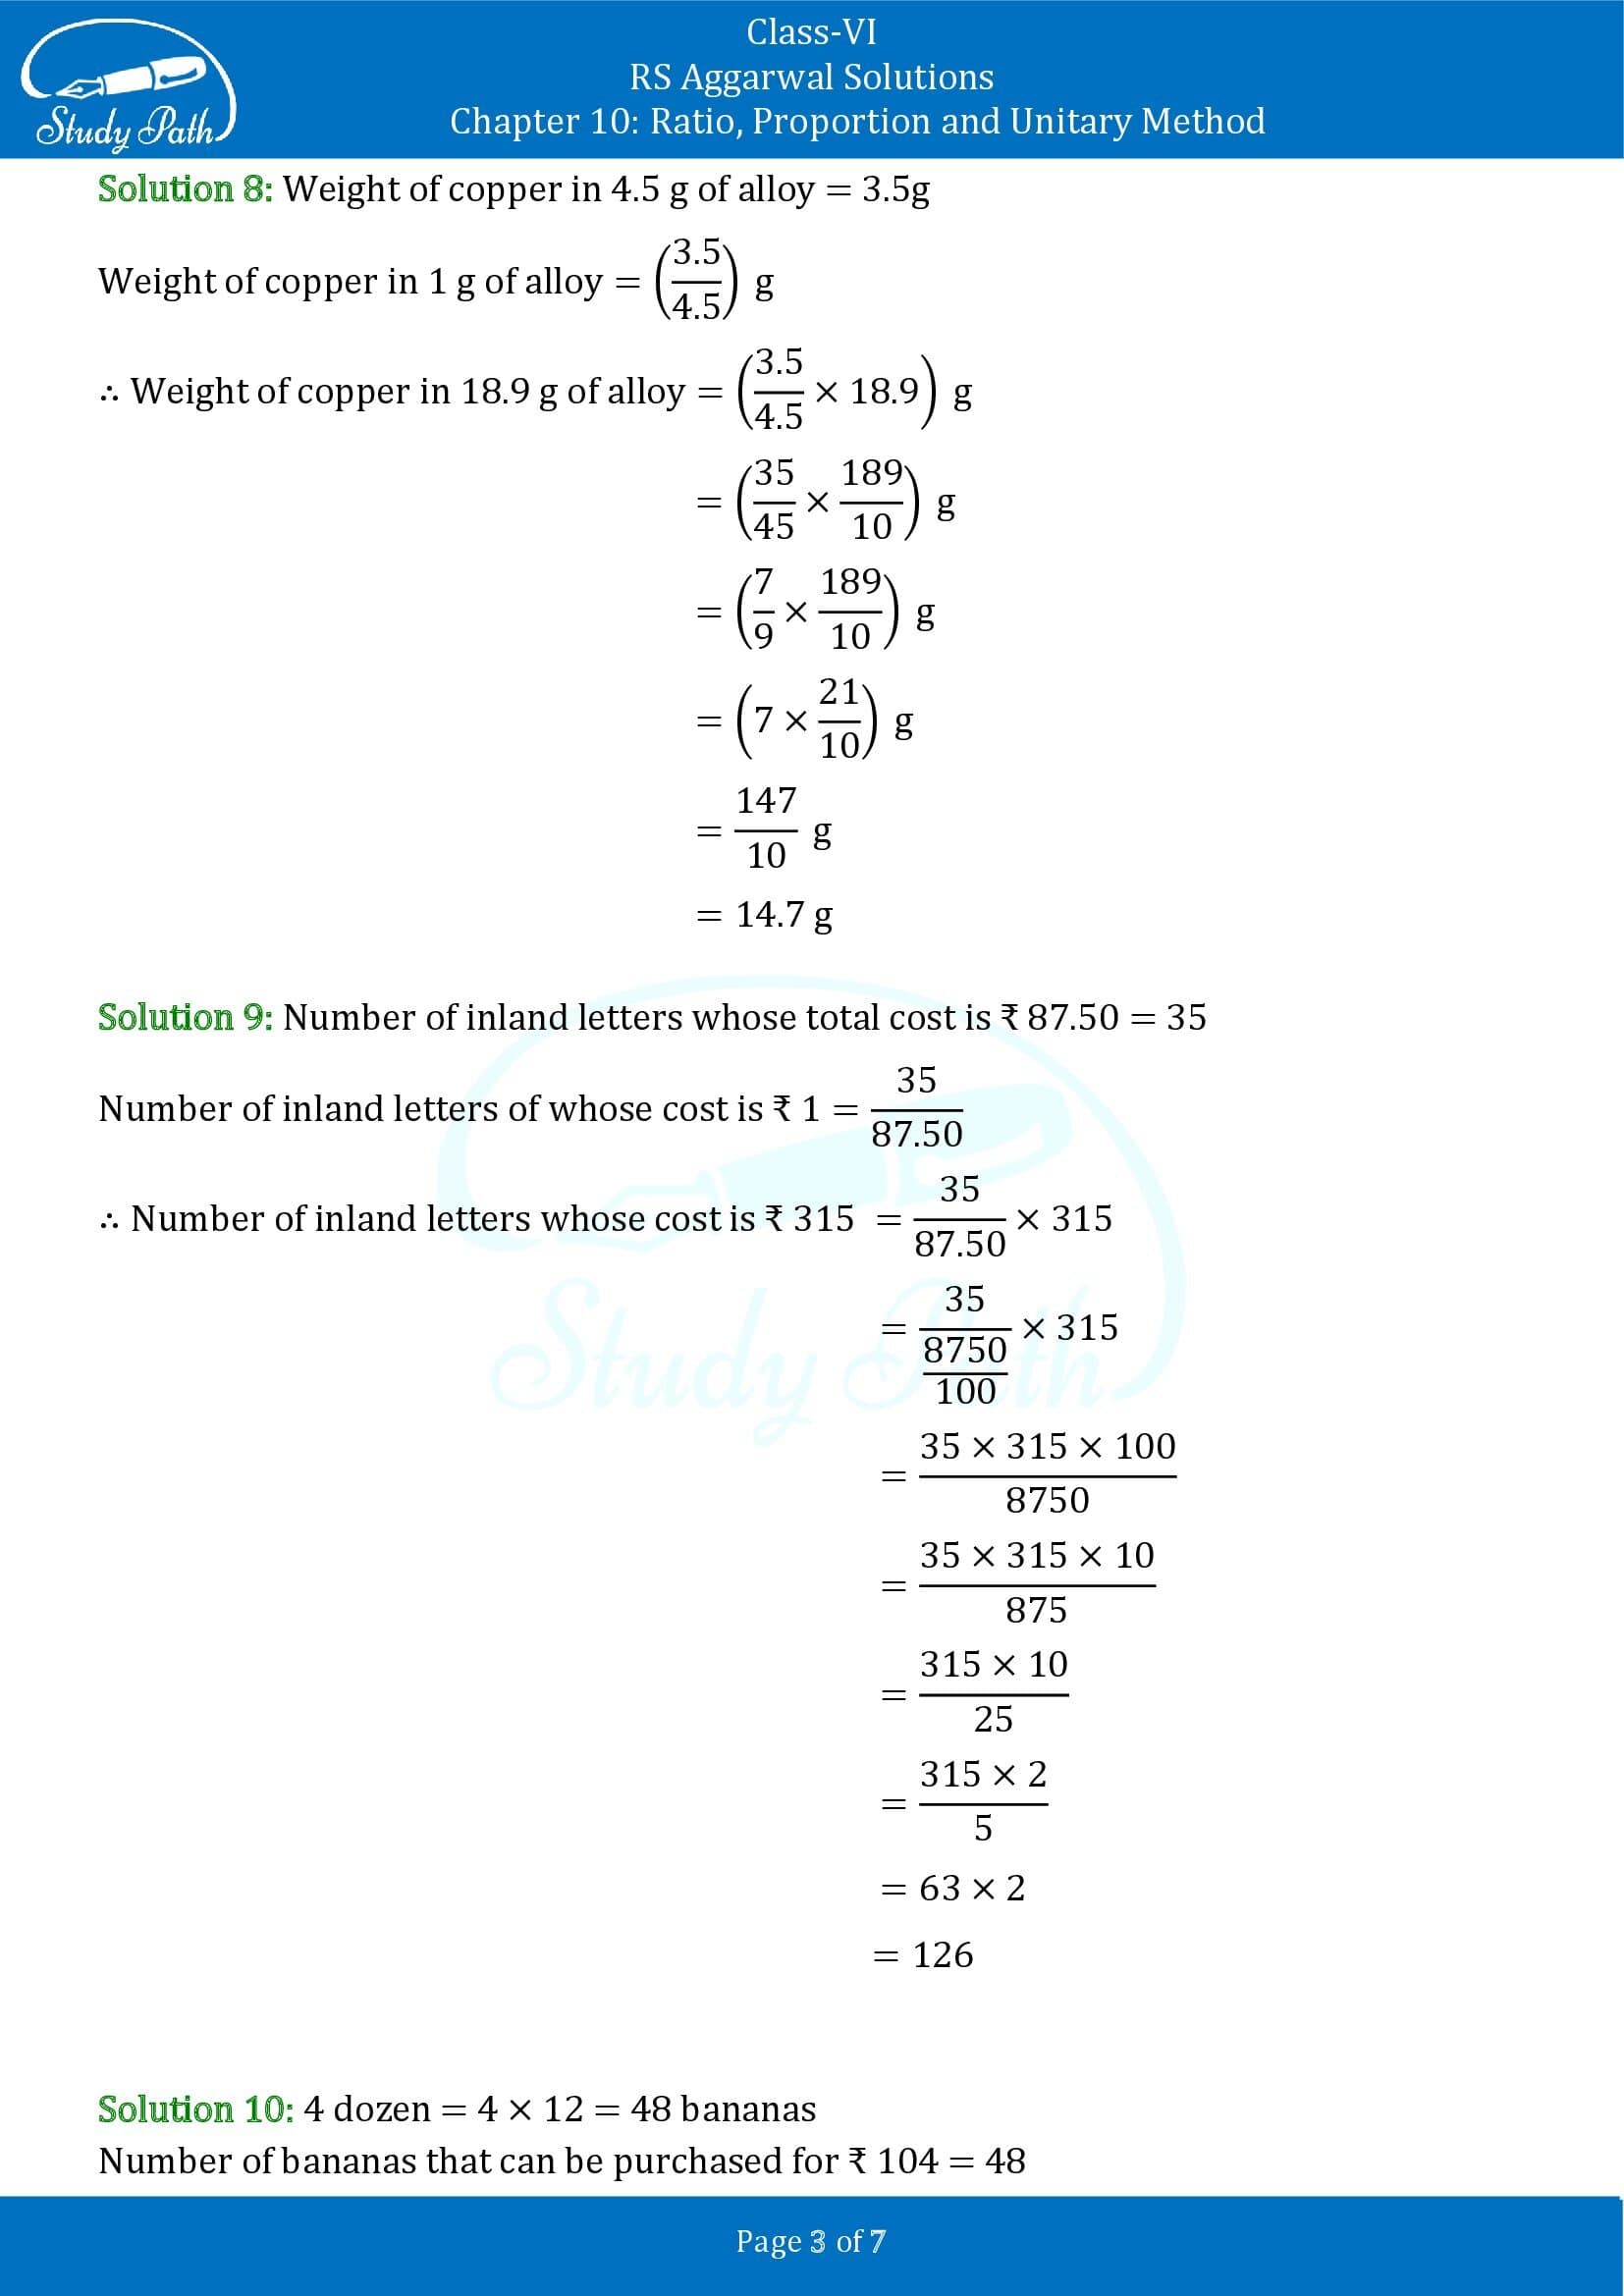 RS Aggarwal Solutions Class 6 Chapter 10 Ratio Proportion and Unitary Method Exercise 10C 00003